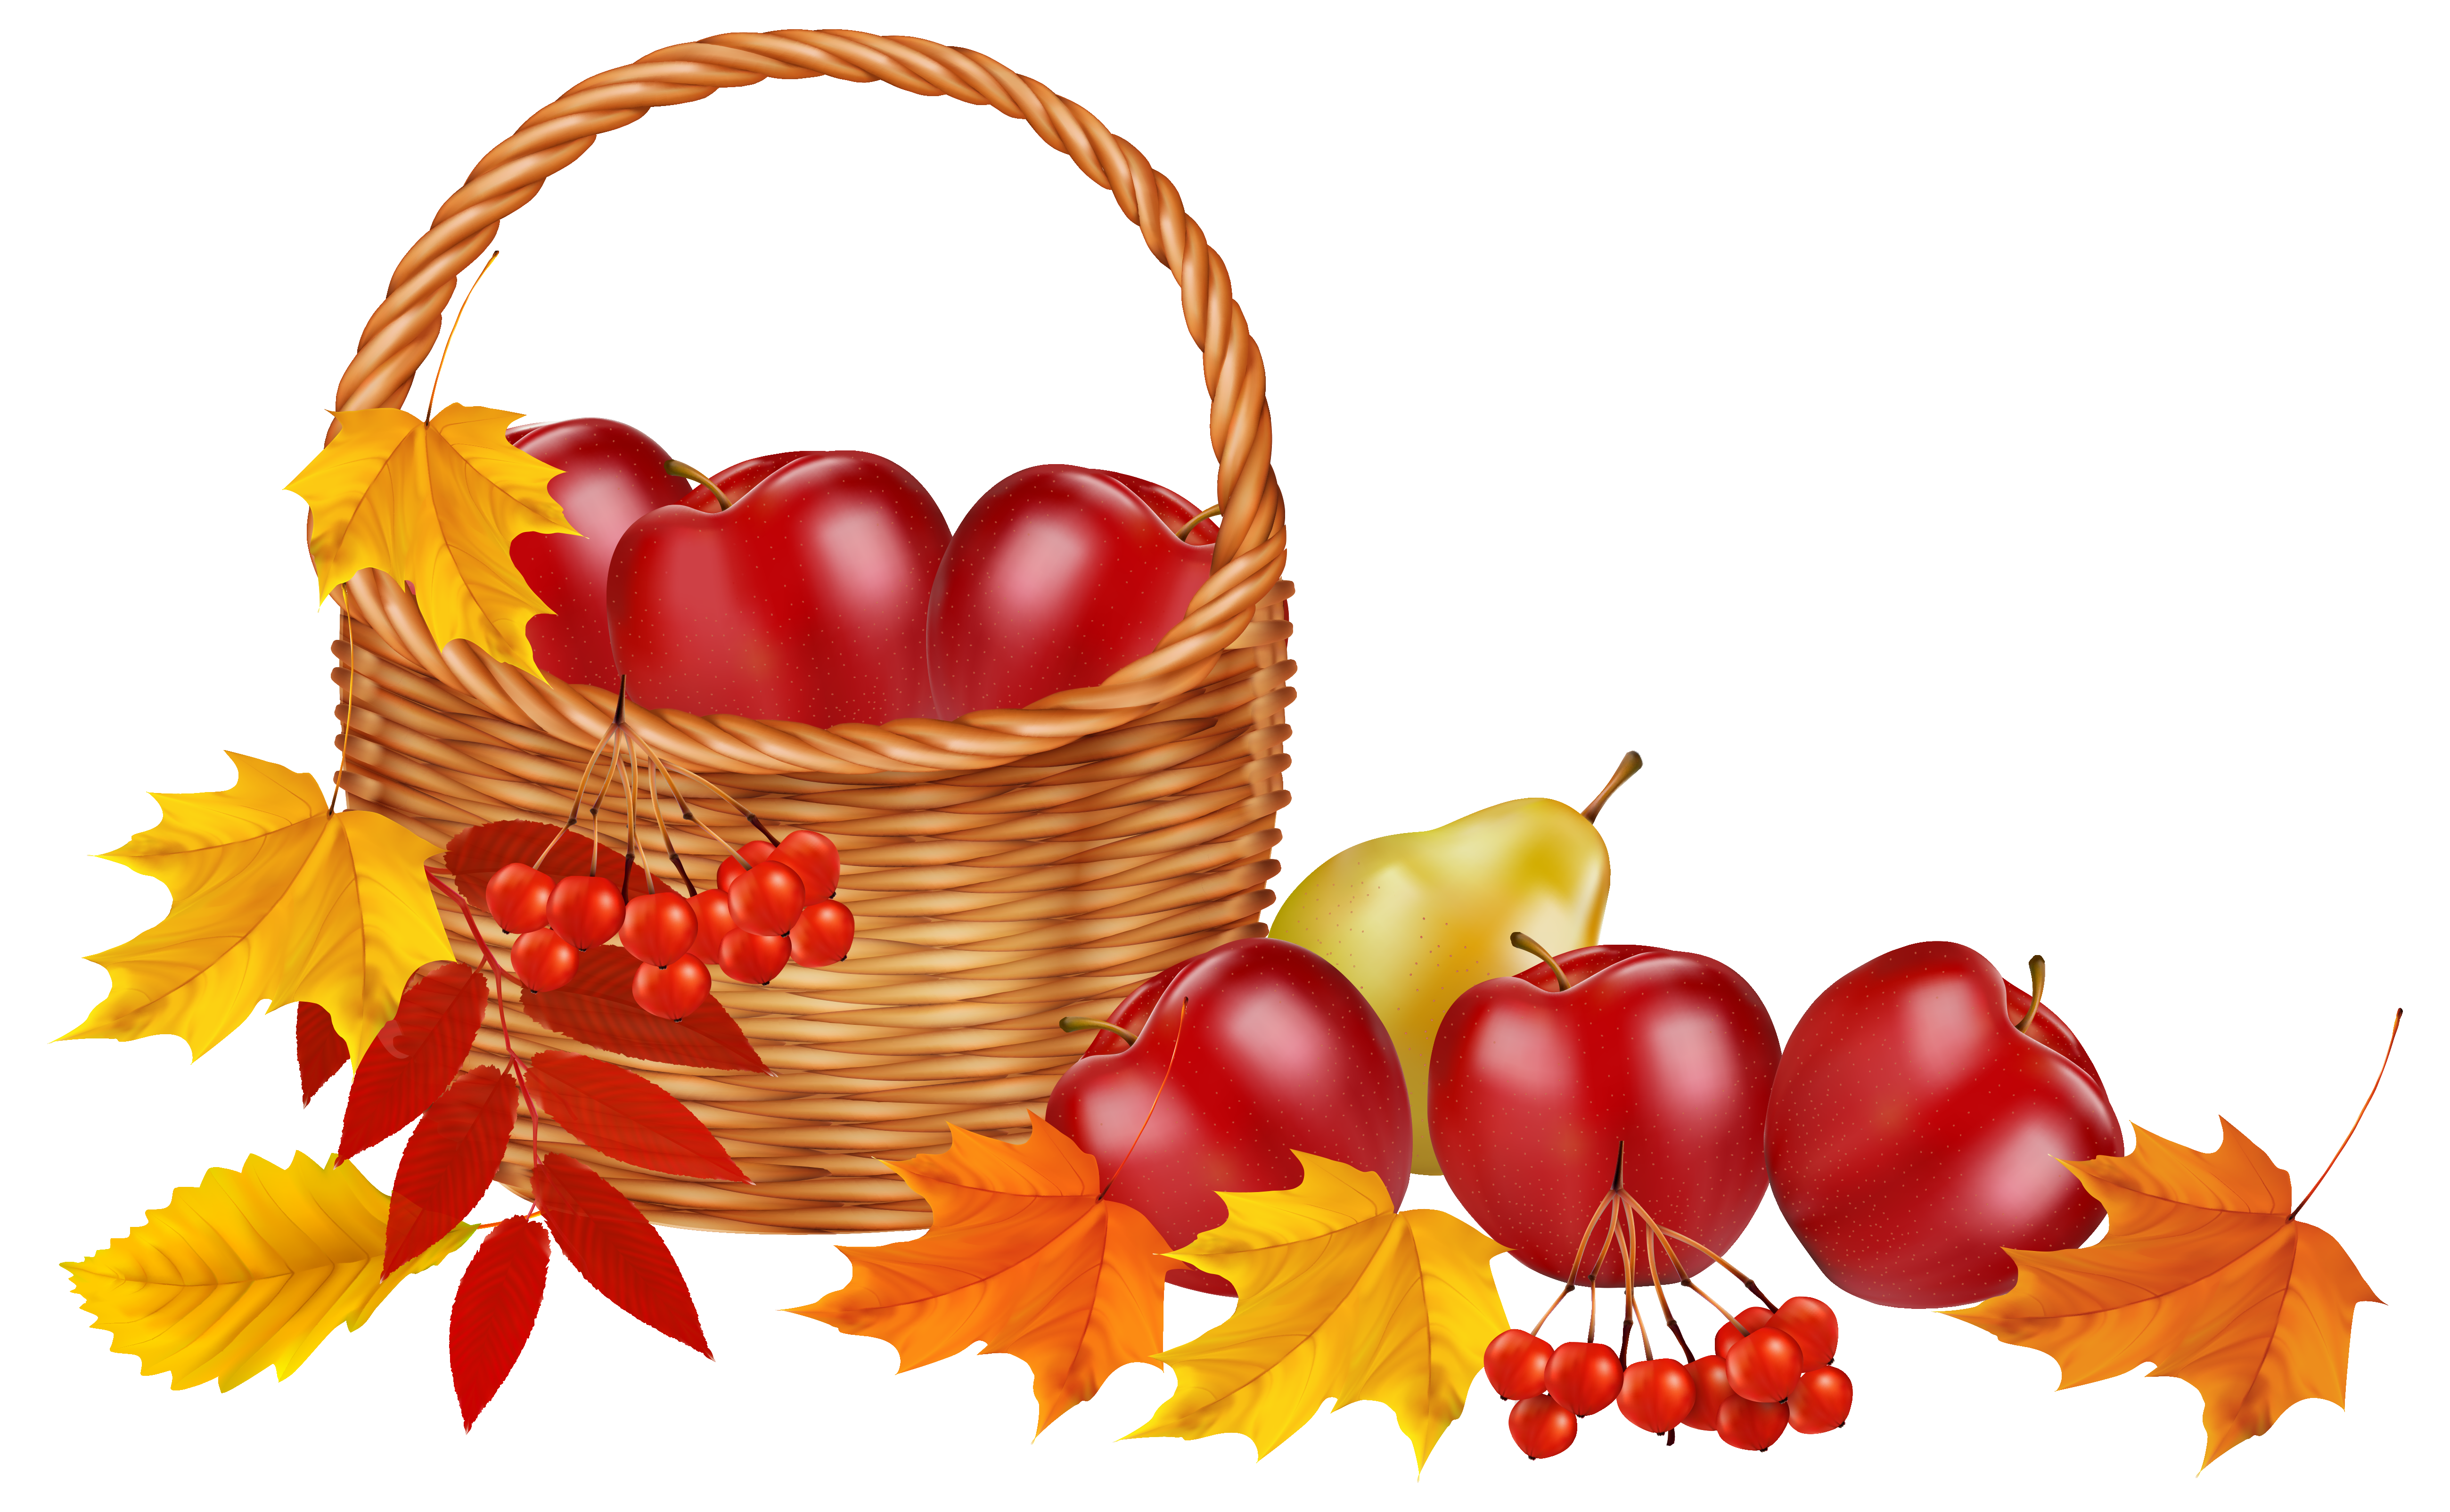 Basket with fruits and Autumn Leaves PNG Clipart Image